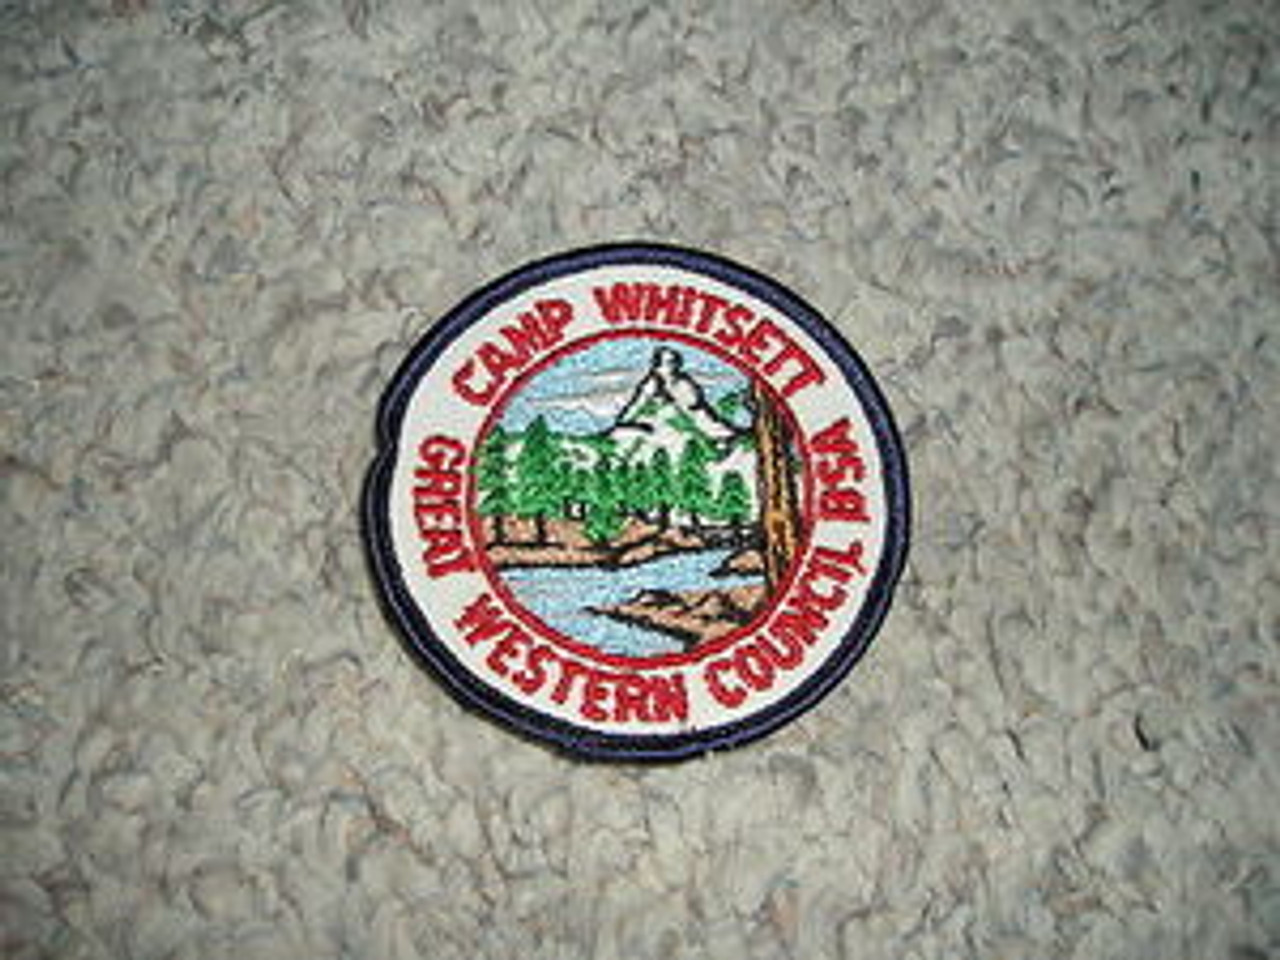 1979 Camp Whitsett STAFF Patch - Scout